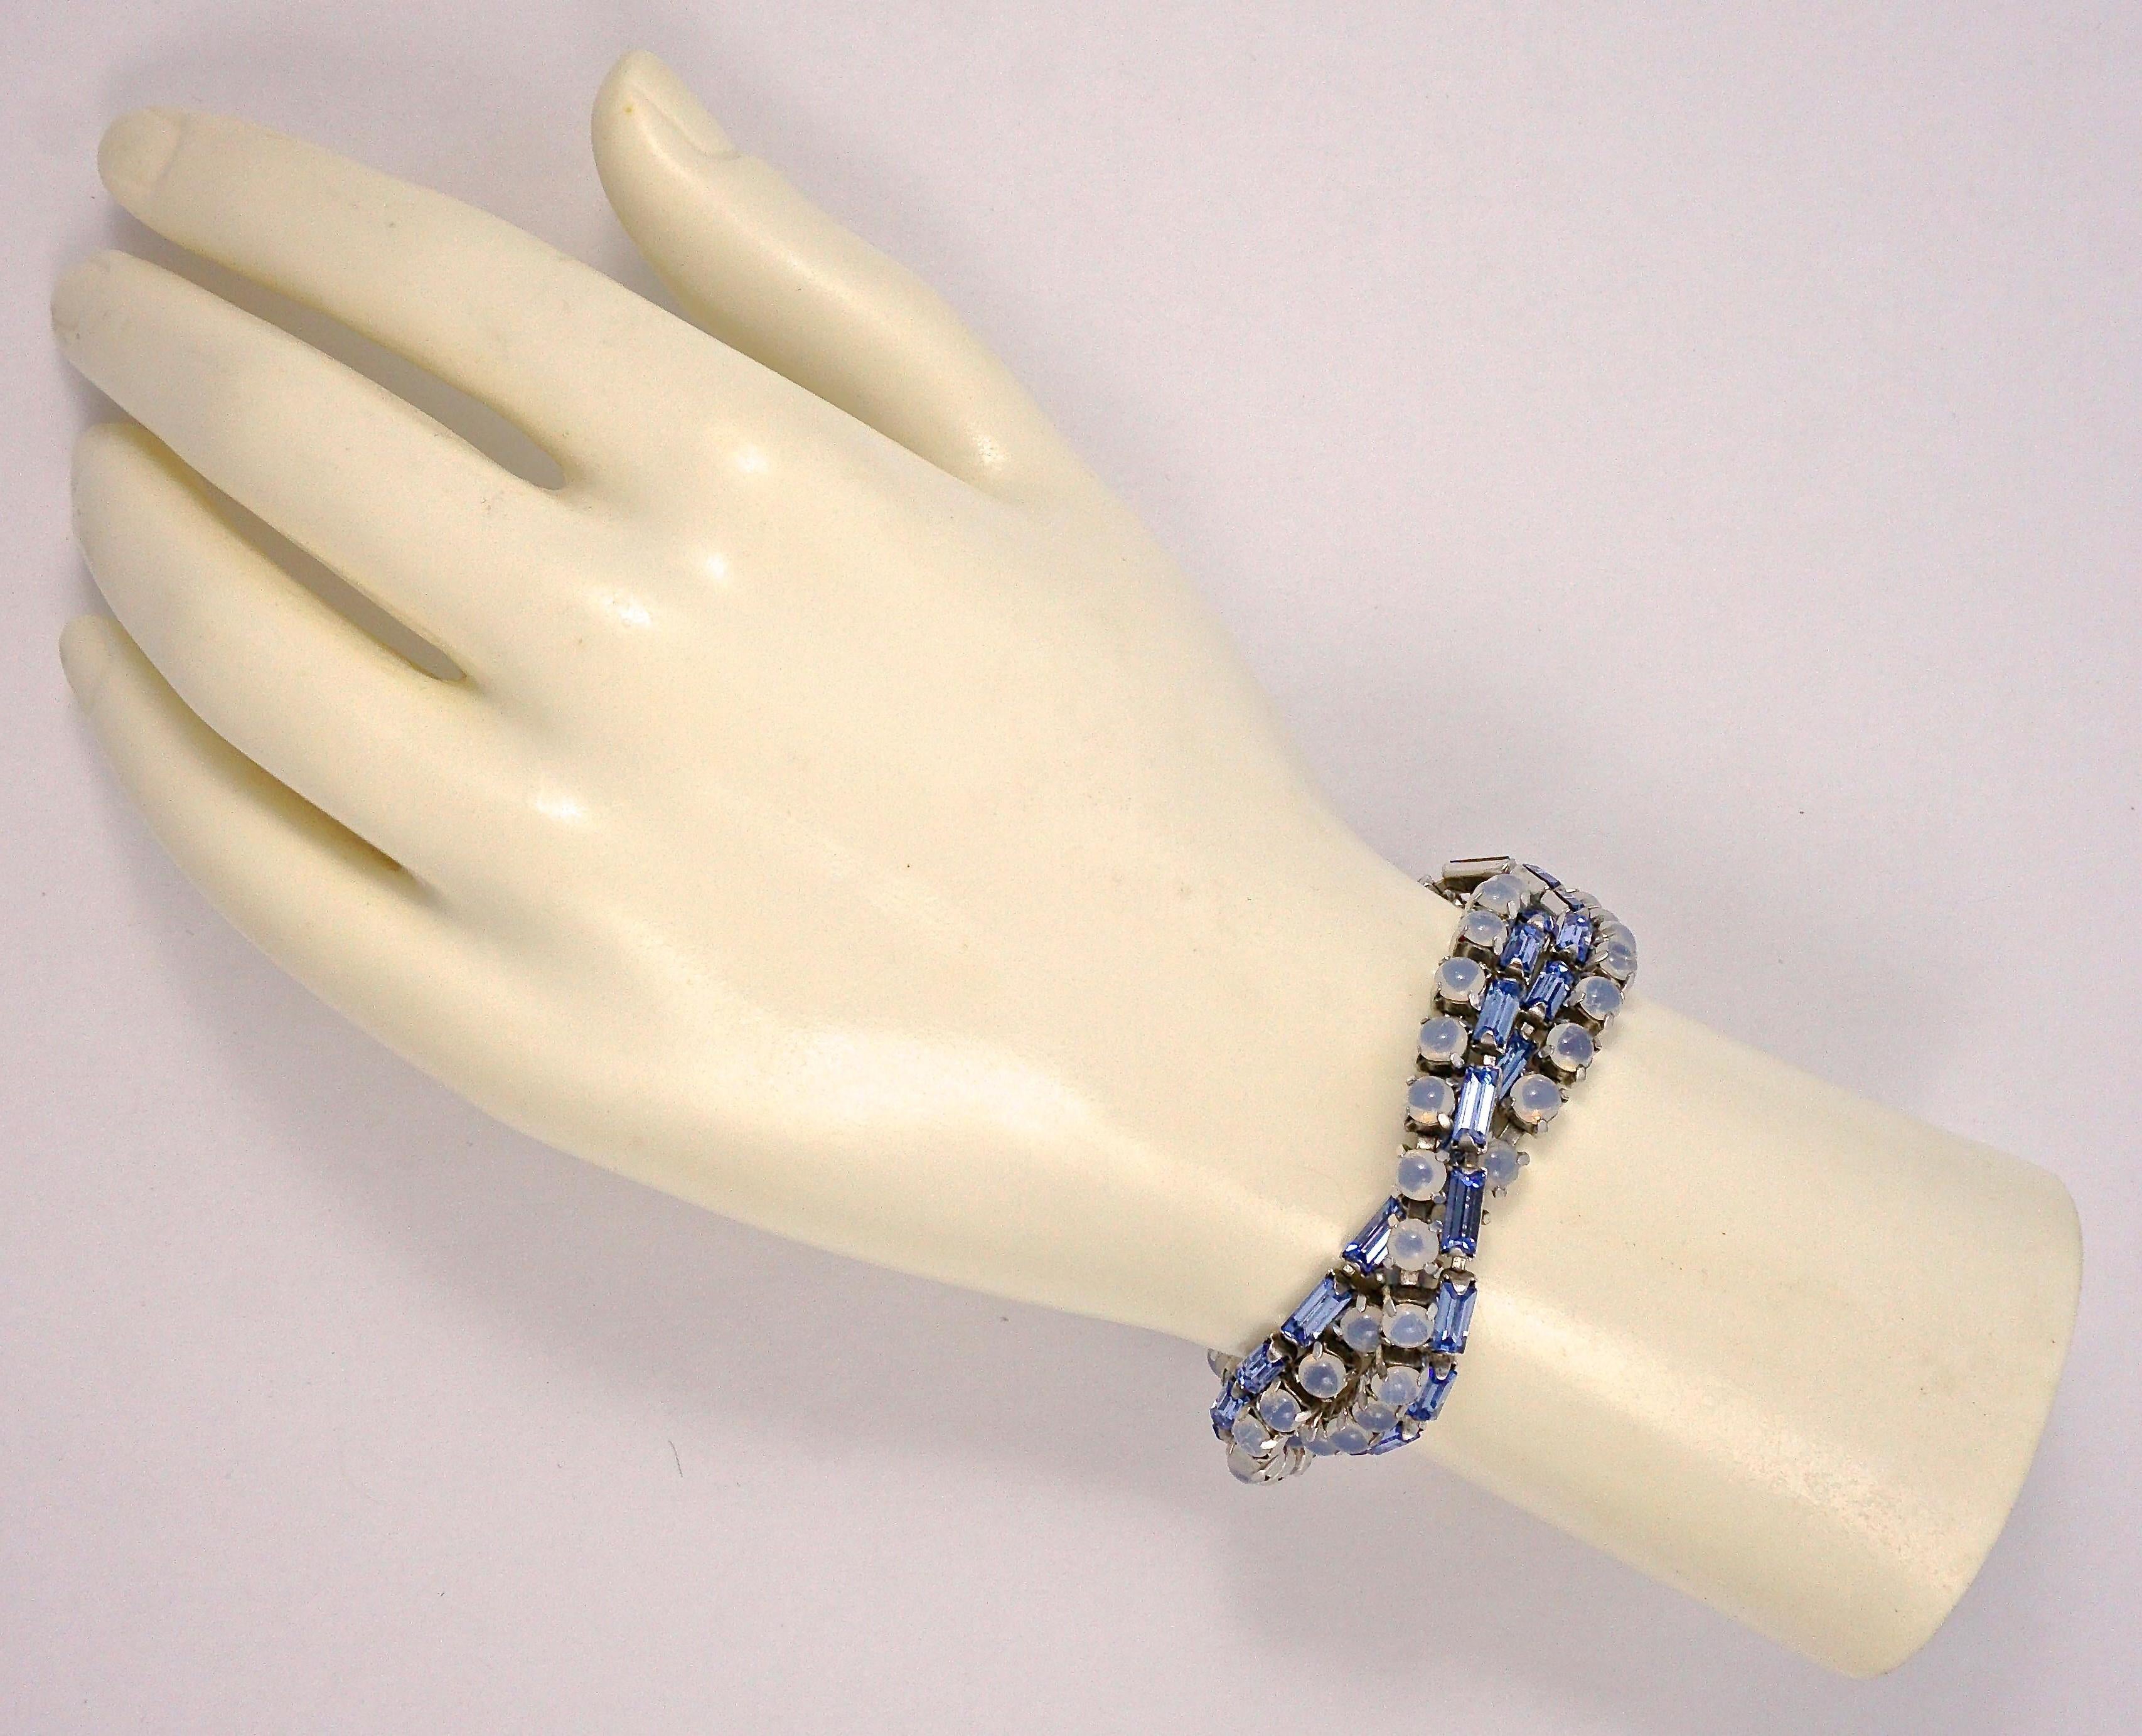 Beautiful silver plated twist bracelet with a safety chain, featuring mid blue baguette rhinestones and round blue grey moonglow cabochons. The clasp is finished with a single round blue rhinestone. Measuring length 18.8cm / 7.4 inches by width in